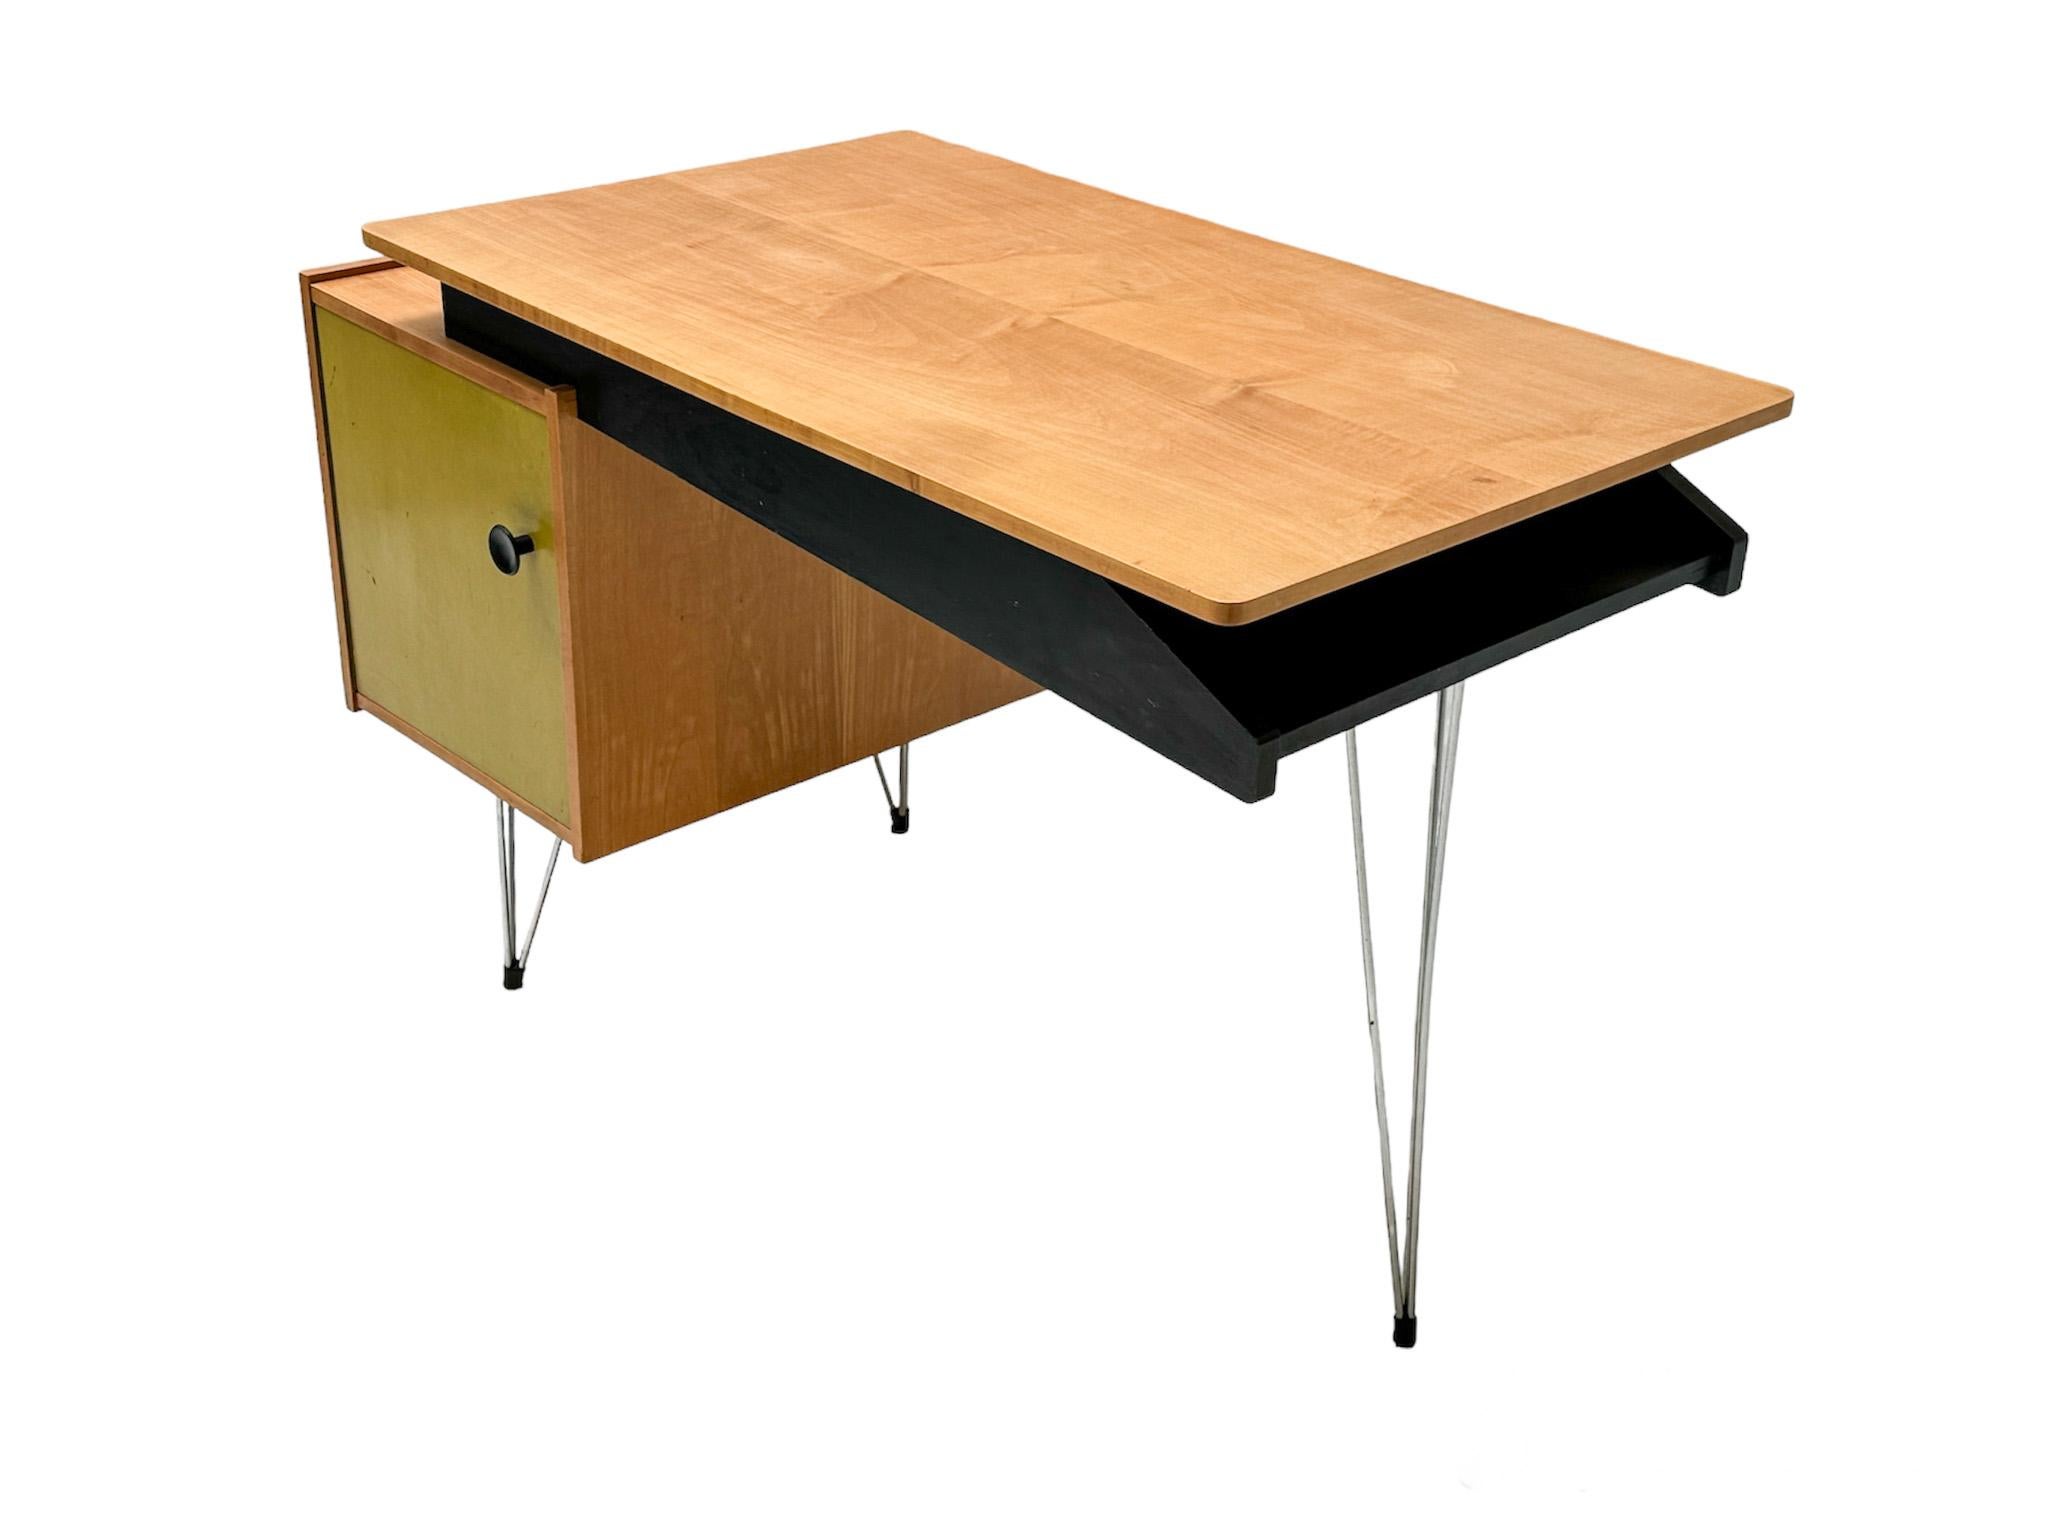 Stunning and rare Mid-Century Modern desk or writing table.
Design by Cees Braakman for Pastoe.
Striking Dutch design from the 1950s.
Elegant birch frame with original lacquered door on original chrome hairpin legs.
Floating refinished birch